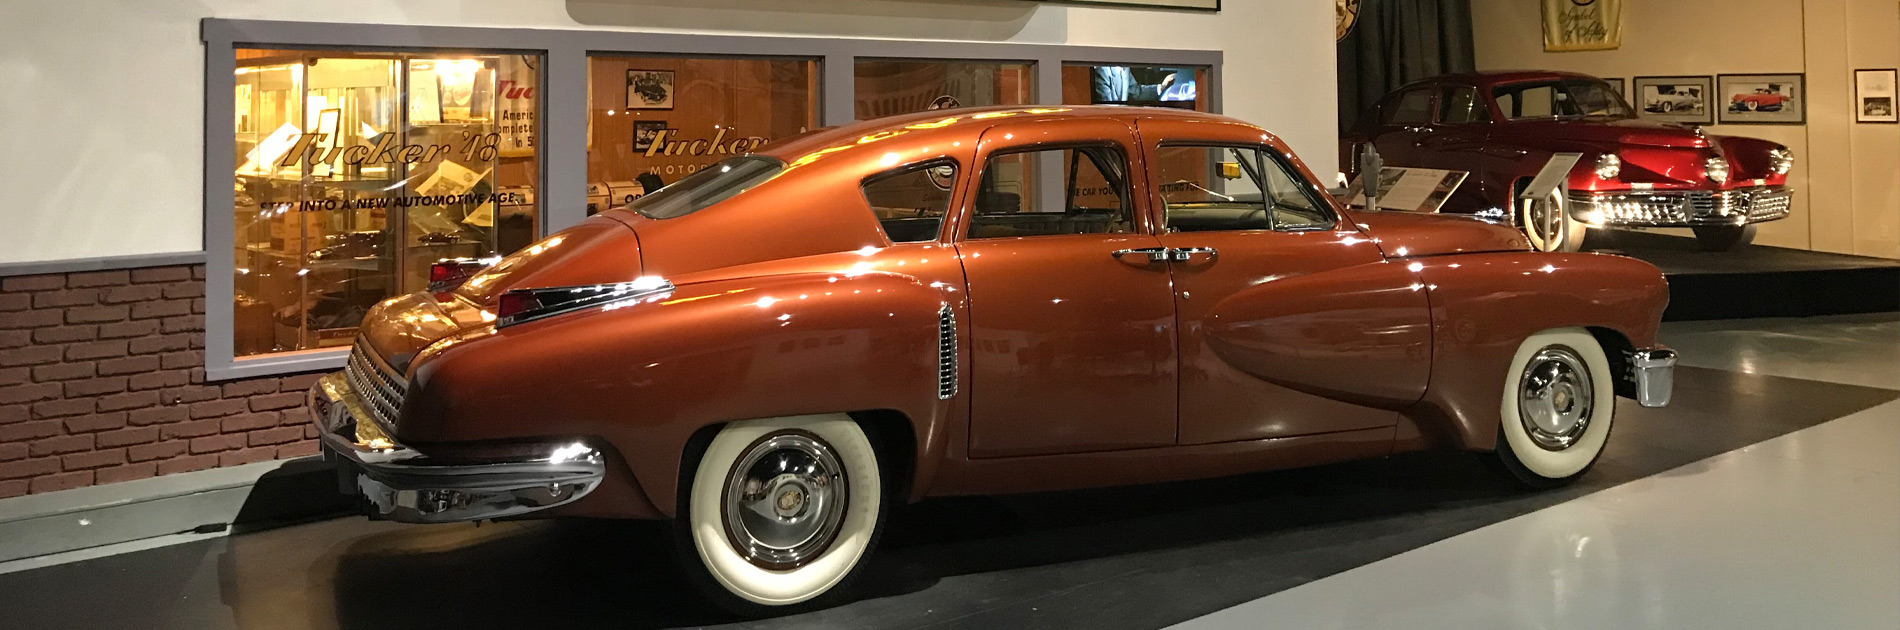 Home to the World's Largest Tucker Collection